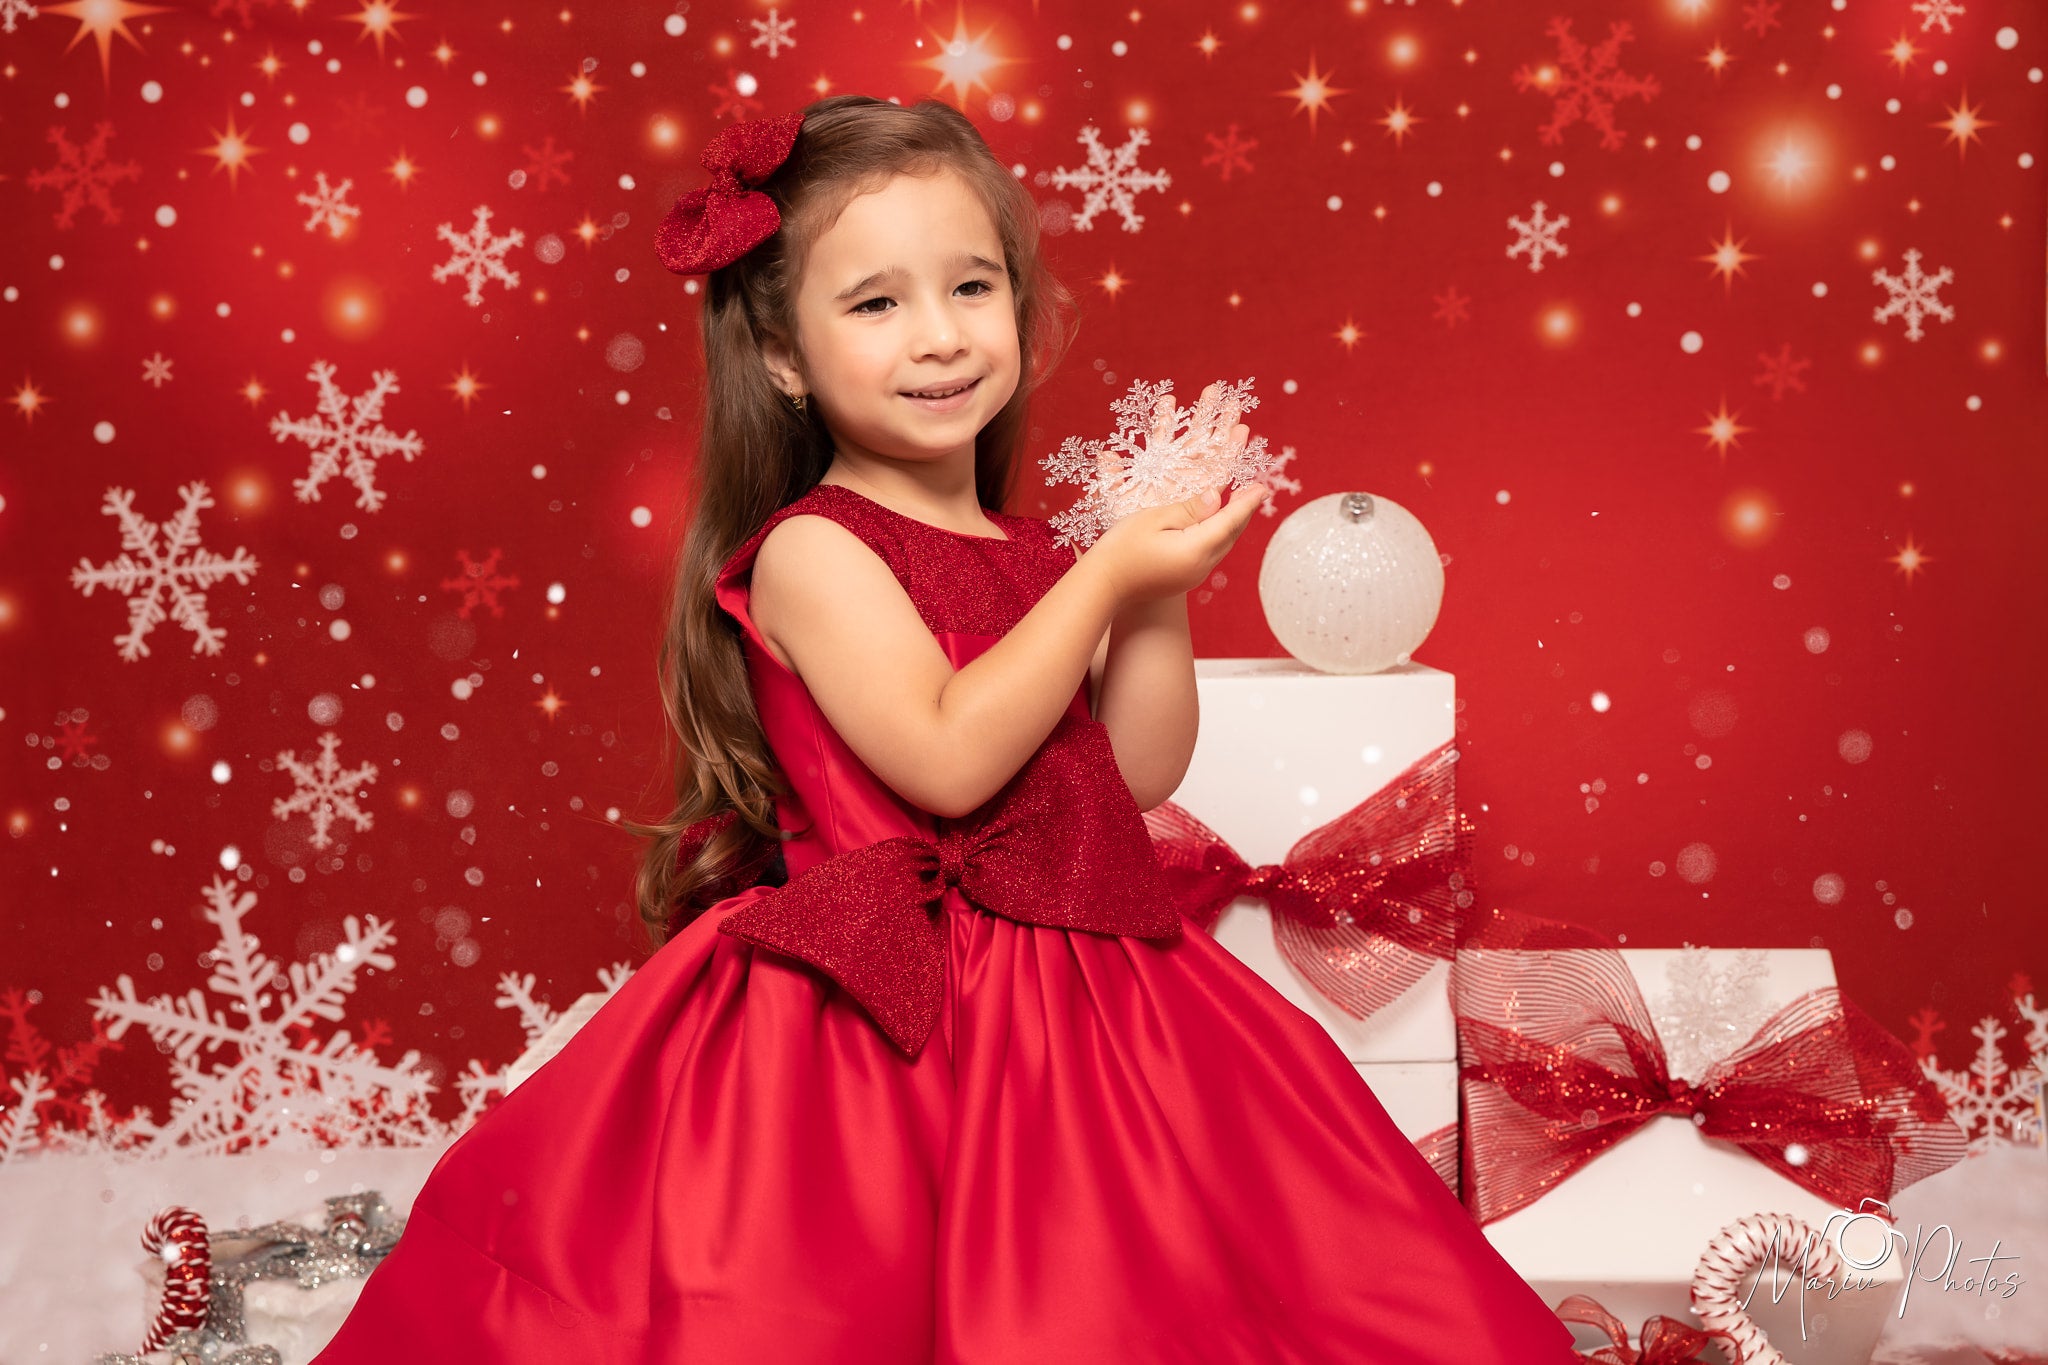 Kate Red Wall Background Snowflake Marry Christmas Backdrops